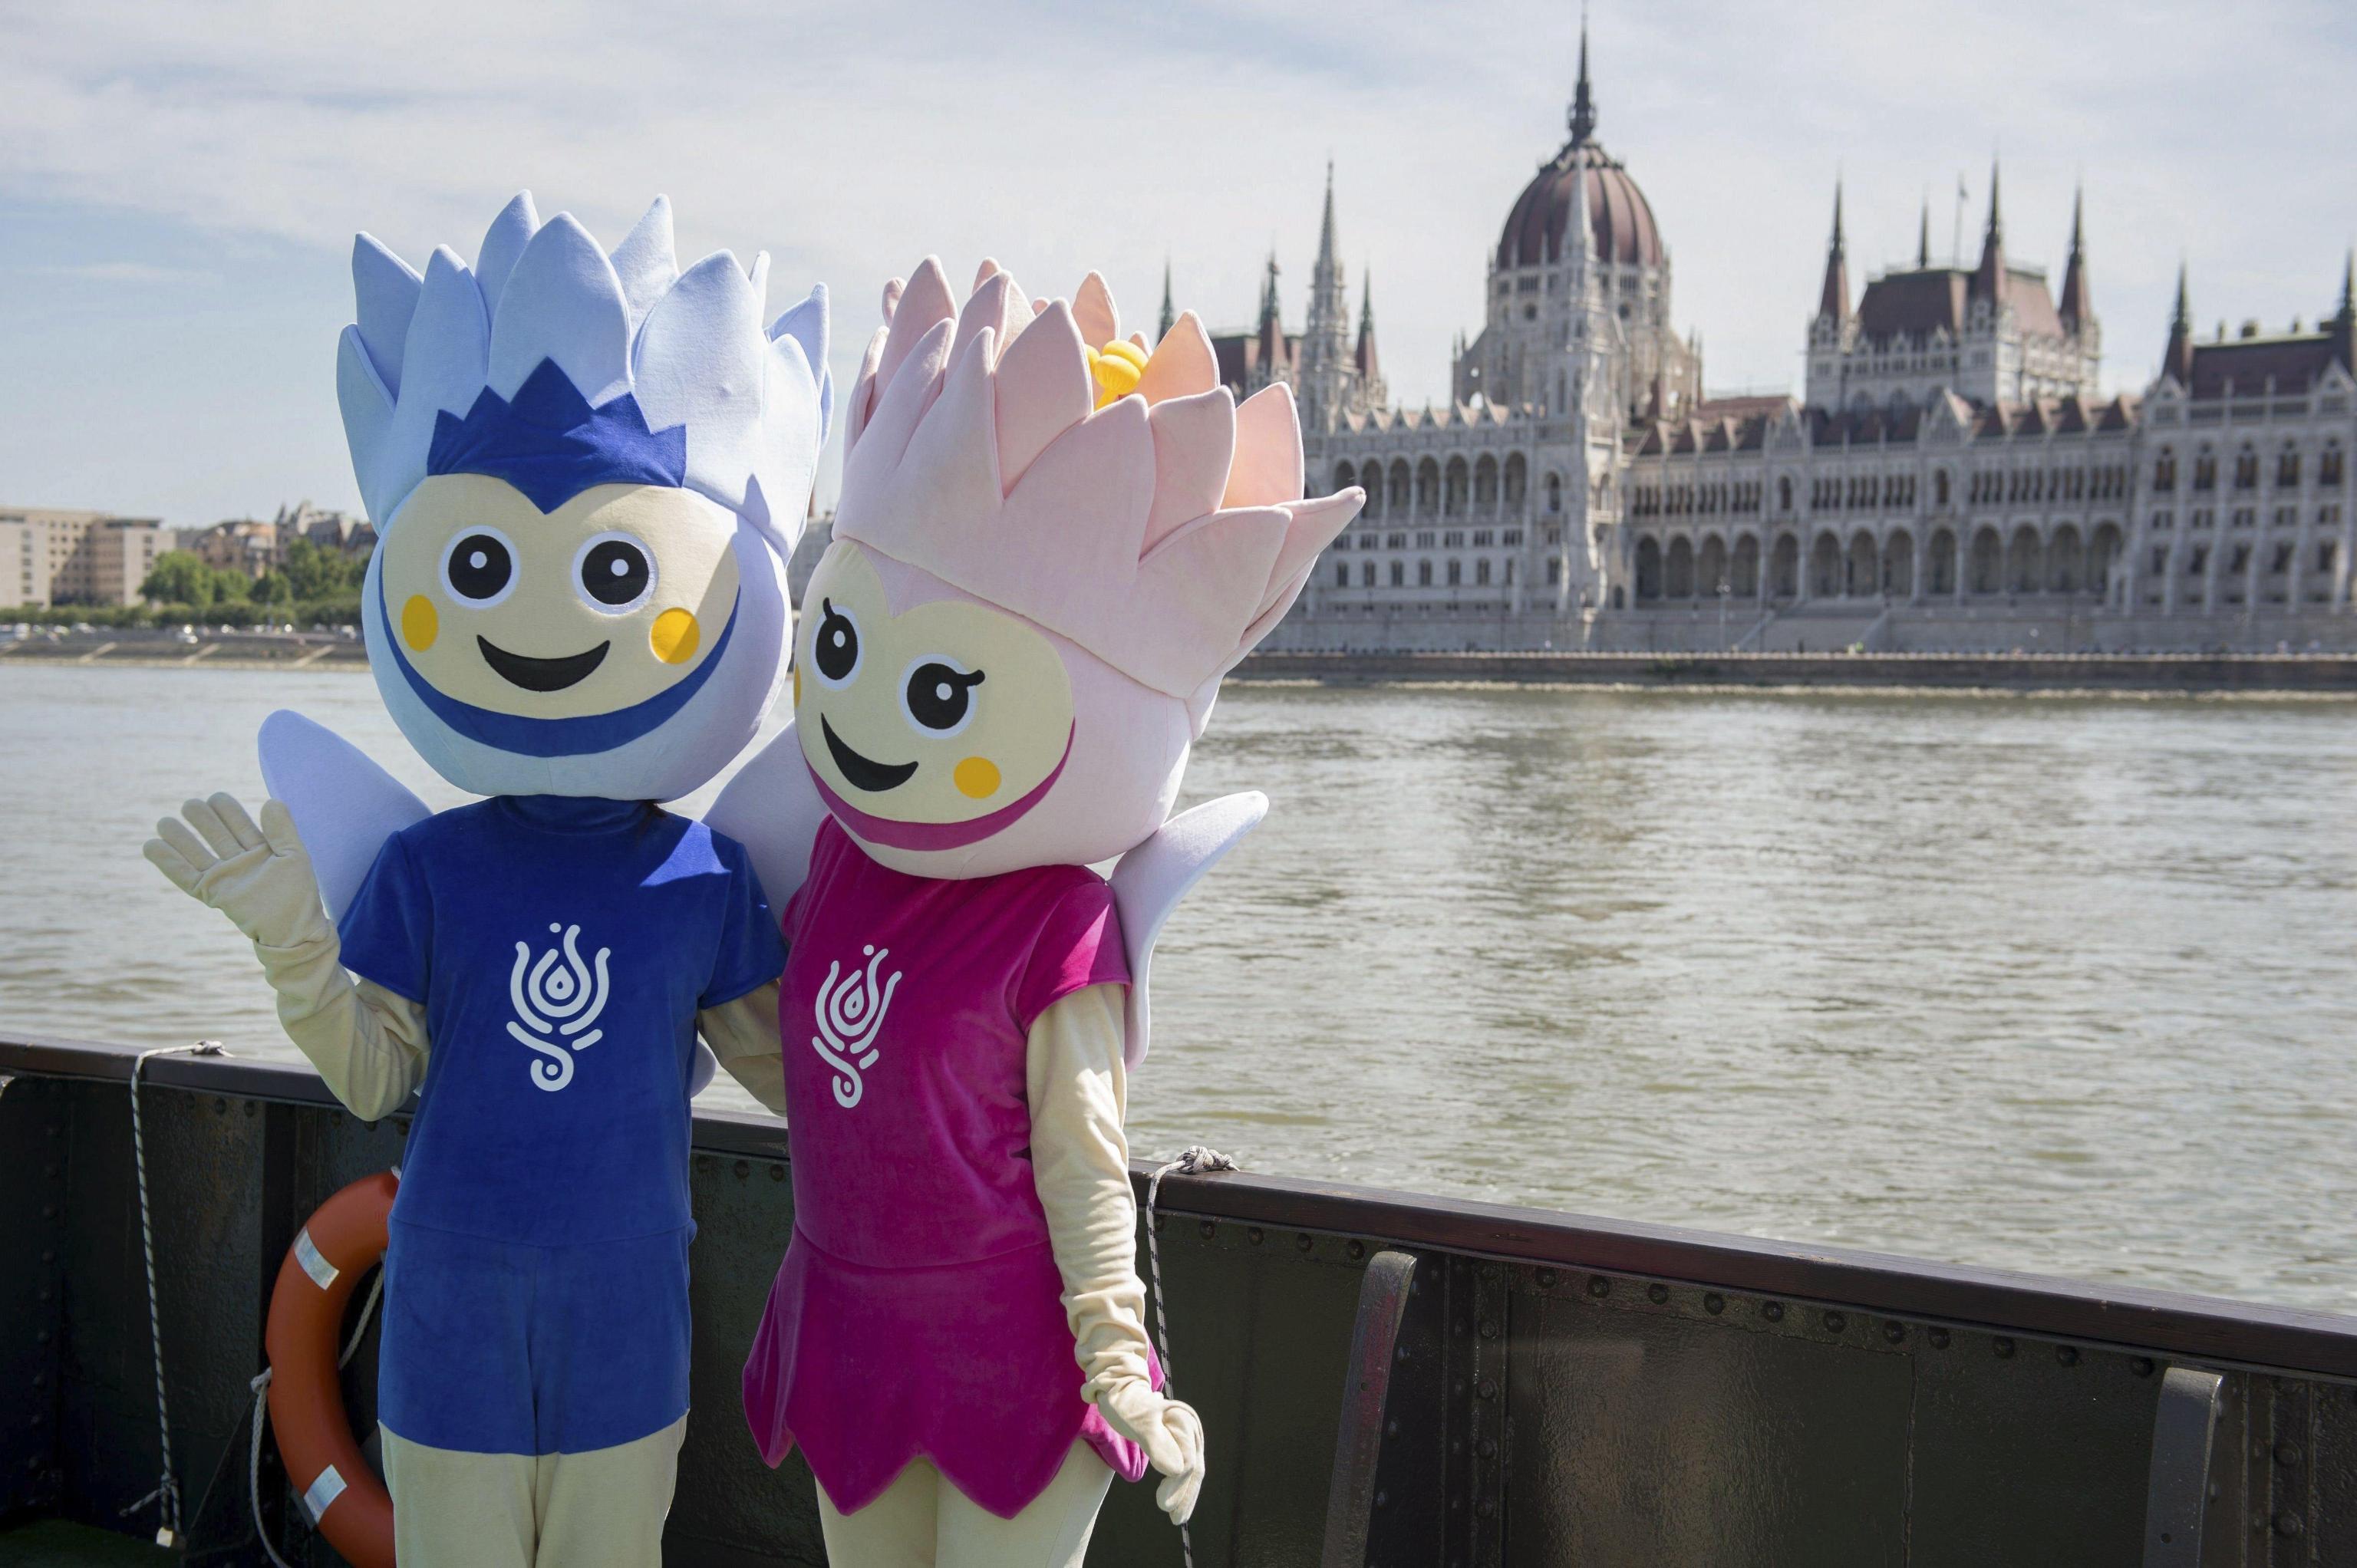 epa06085209 Lali and Lili, the two mascots of 2017 FINA World Aquatics Championships pose next to the visitors' centre at the lower embankment of Buda, in the background the building of the Hungarian Parliament is seen in Budapest, Hungary, 06 July 2017 (issued 13 July). The FINA World Aquatics Championships 2017 will be held in Hungary between July 14 and 30.  EPA/Csilla Cseke HUNGARY OUT